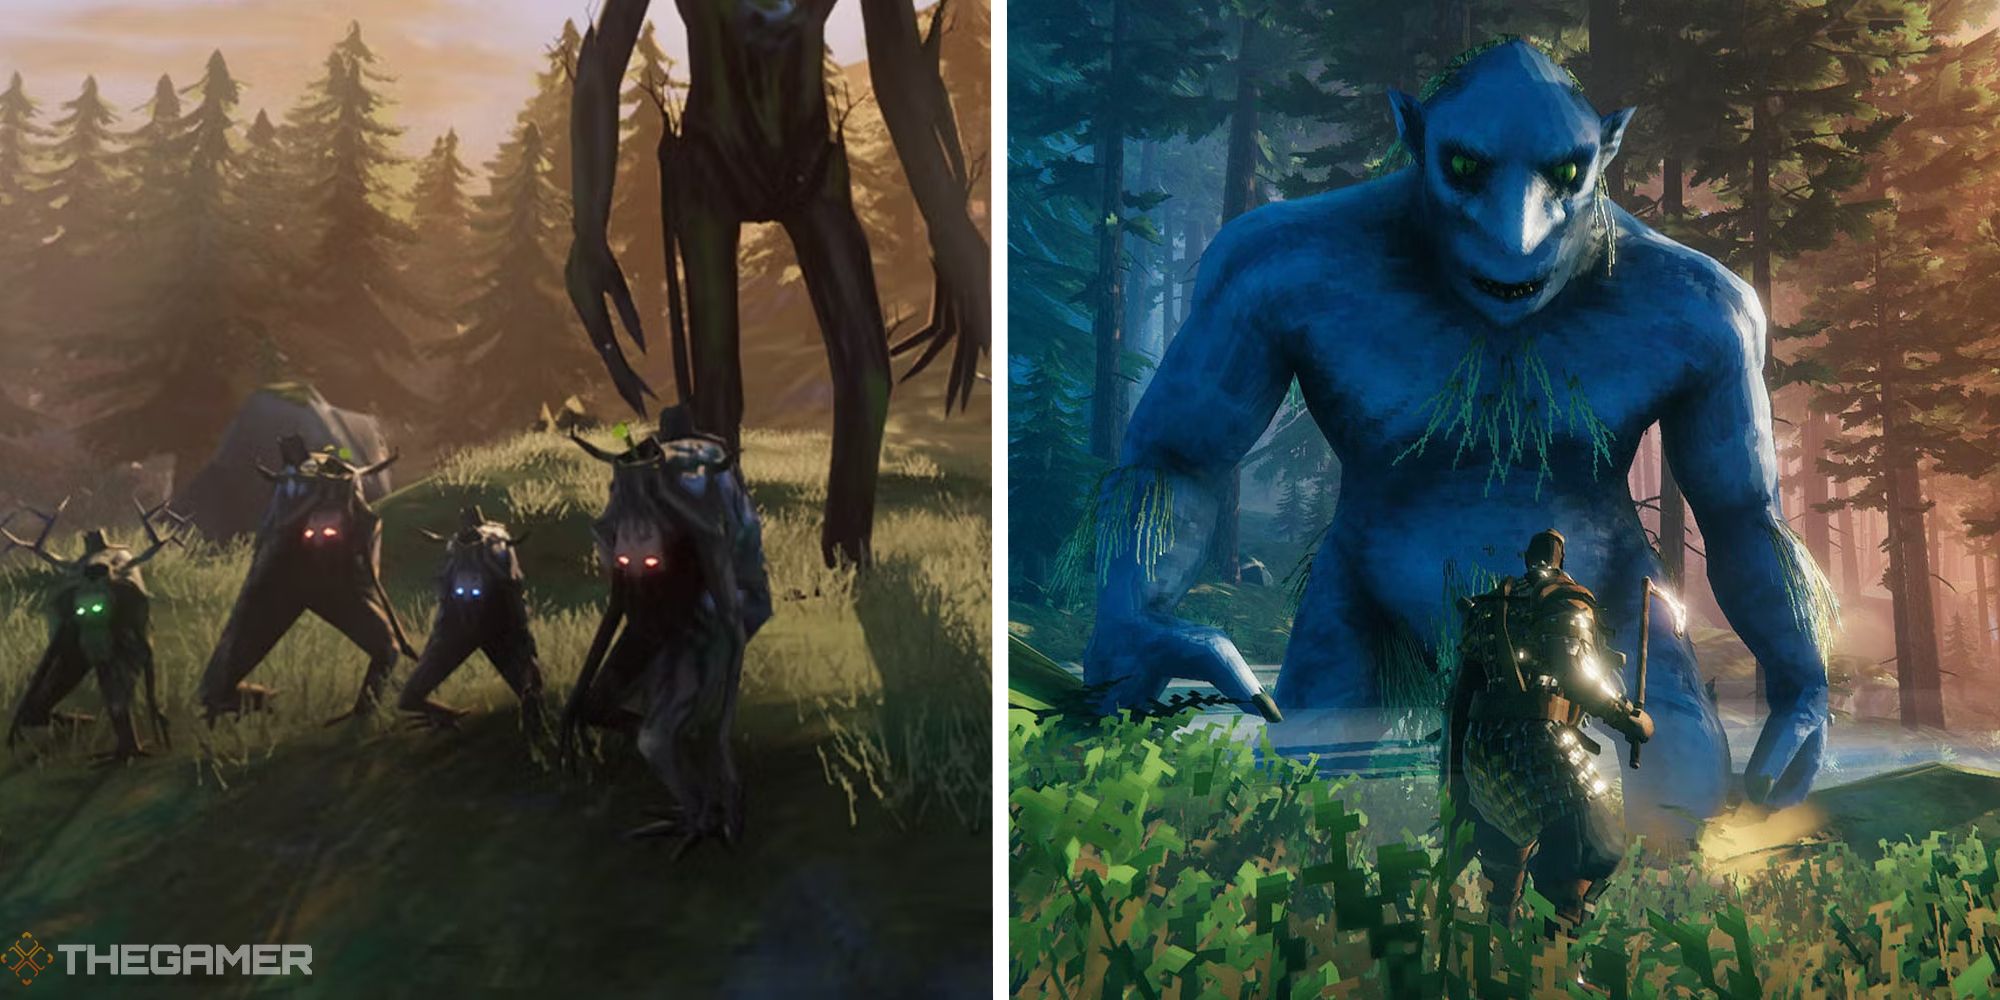 split image showing greydwarfs lined up, next to image of player facing a troll